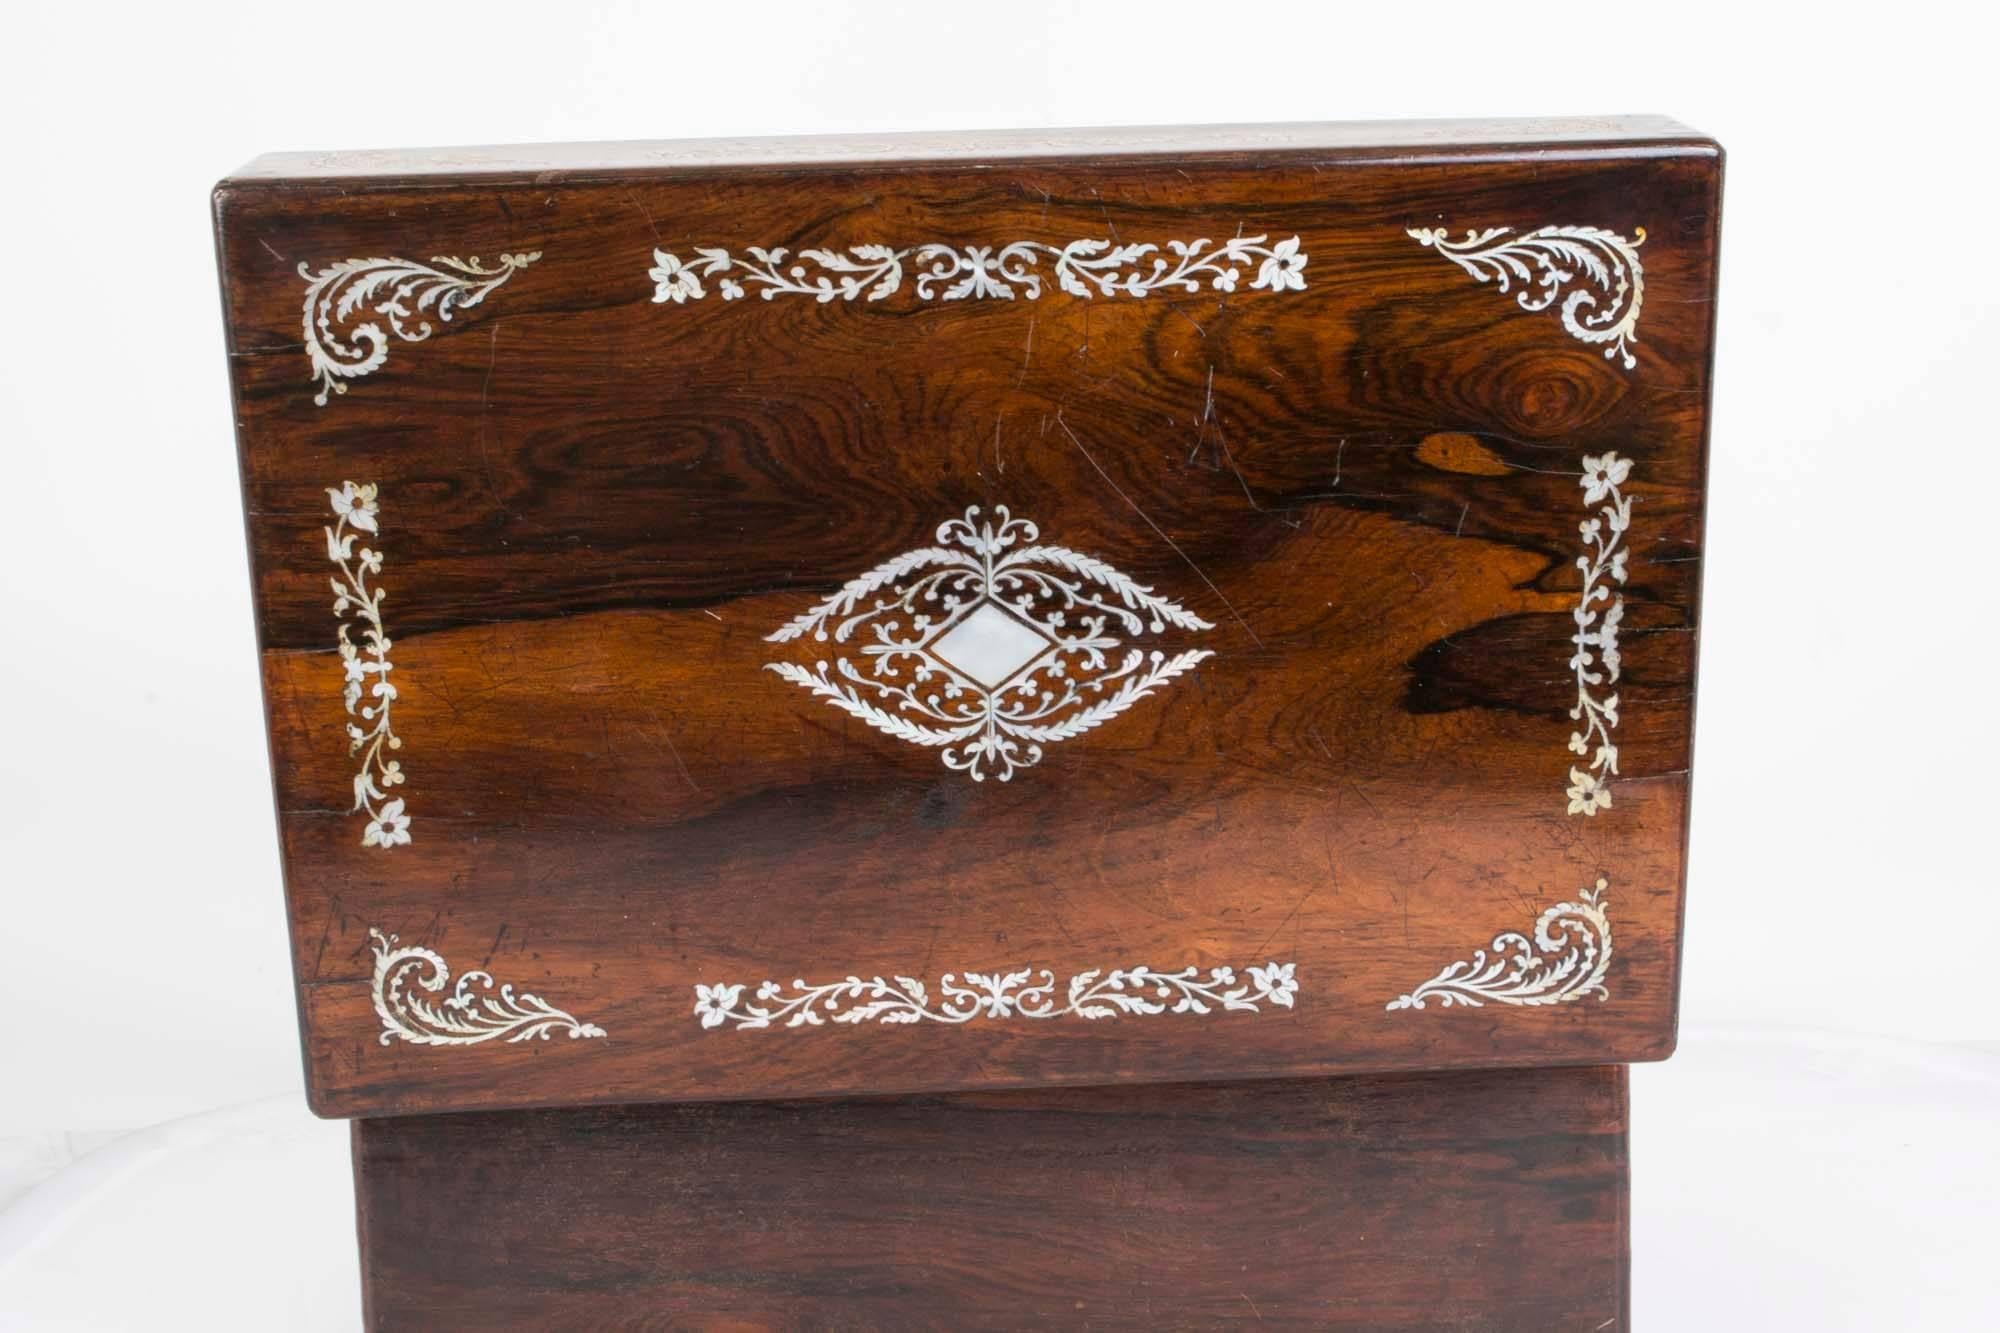 This is a fabulous antique Victorian rosewood and mother-of-pearl vanity box, circa 1860.

The box has a fitted burgundy velvet interior with a removable tray and further compartments to store your jewellery or any small objects. There is also a